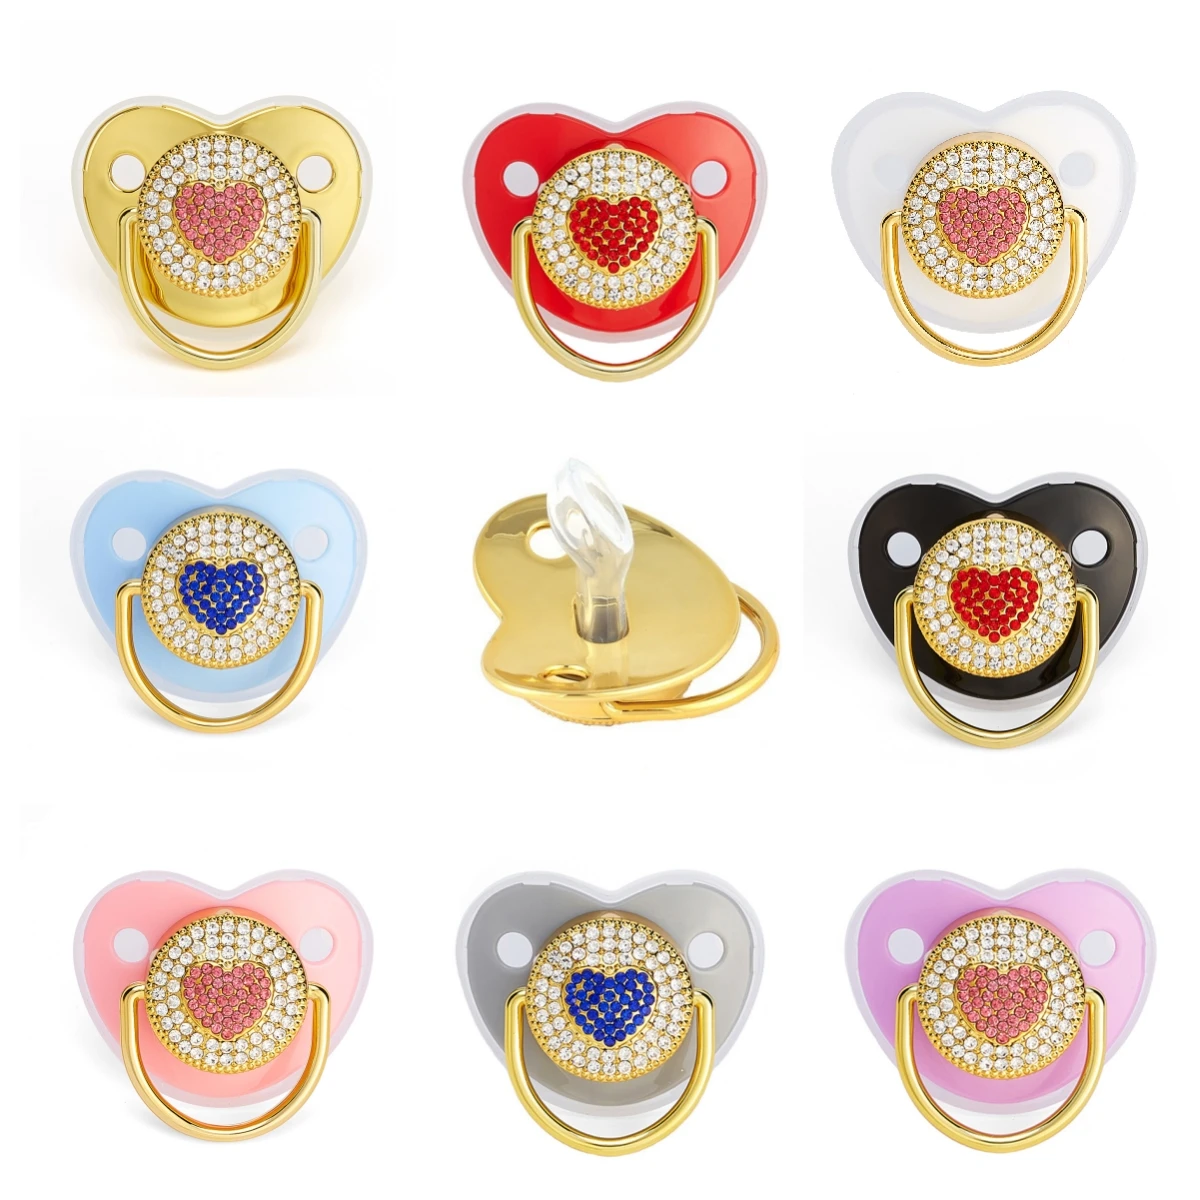 

BPA Free Silicone Luxury Diamond Love Heart Baby Pacifier Newborn Nipple Infant Teether Bling Dummy Soother Chupeta 0-12 Months